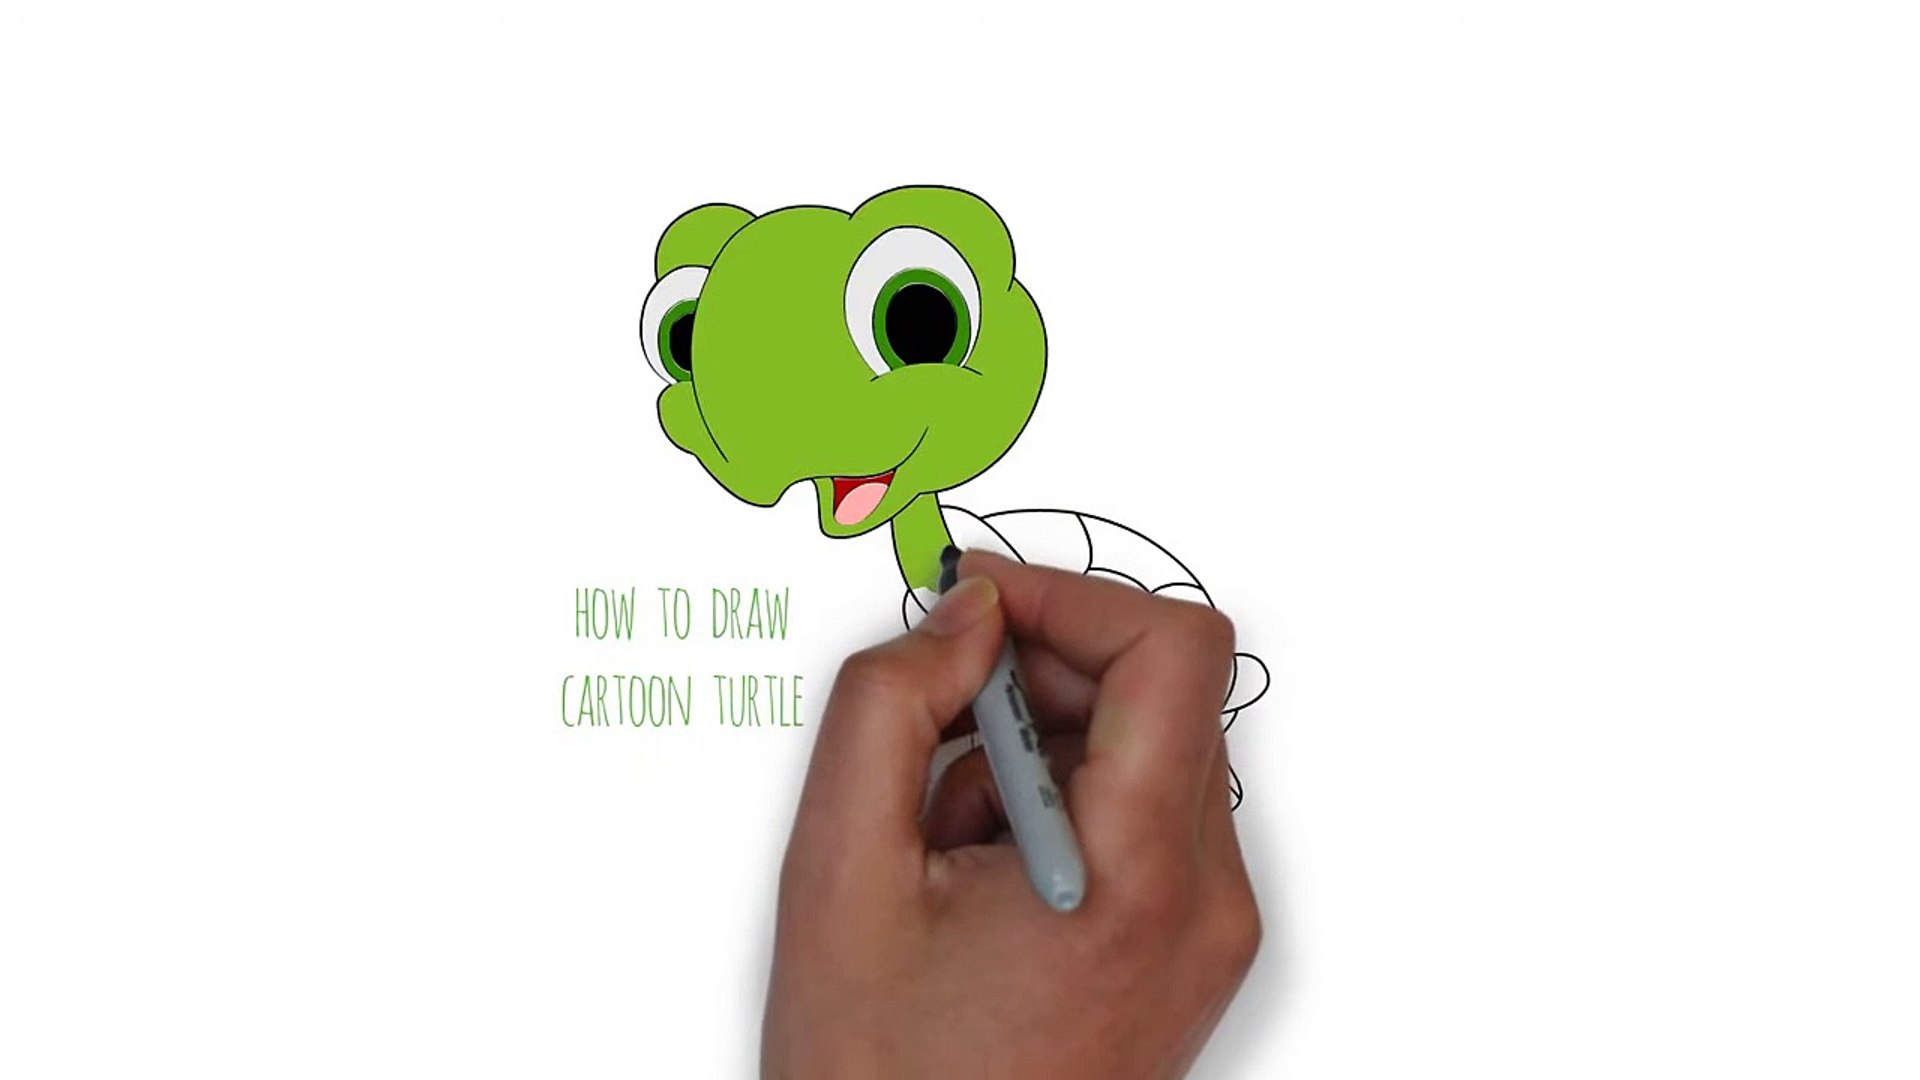 How To Draw A Cartoon Turtle - Cartooning For Kids - video Dailymotion